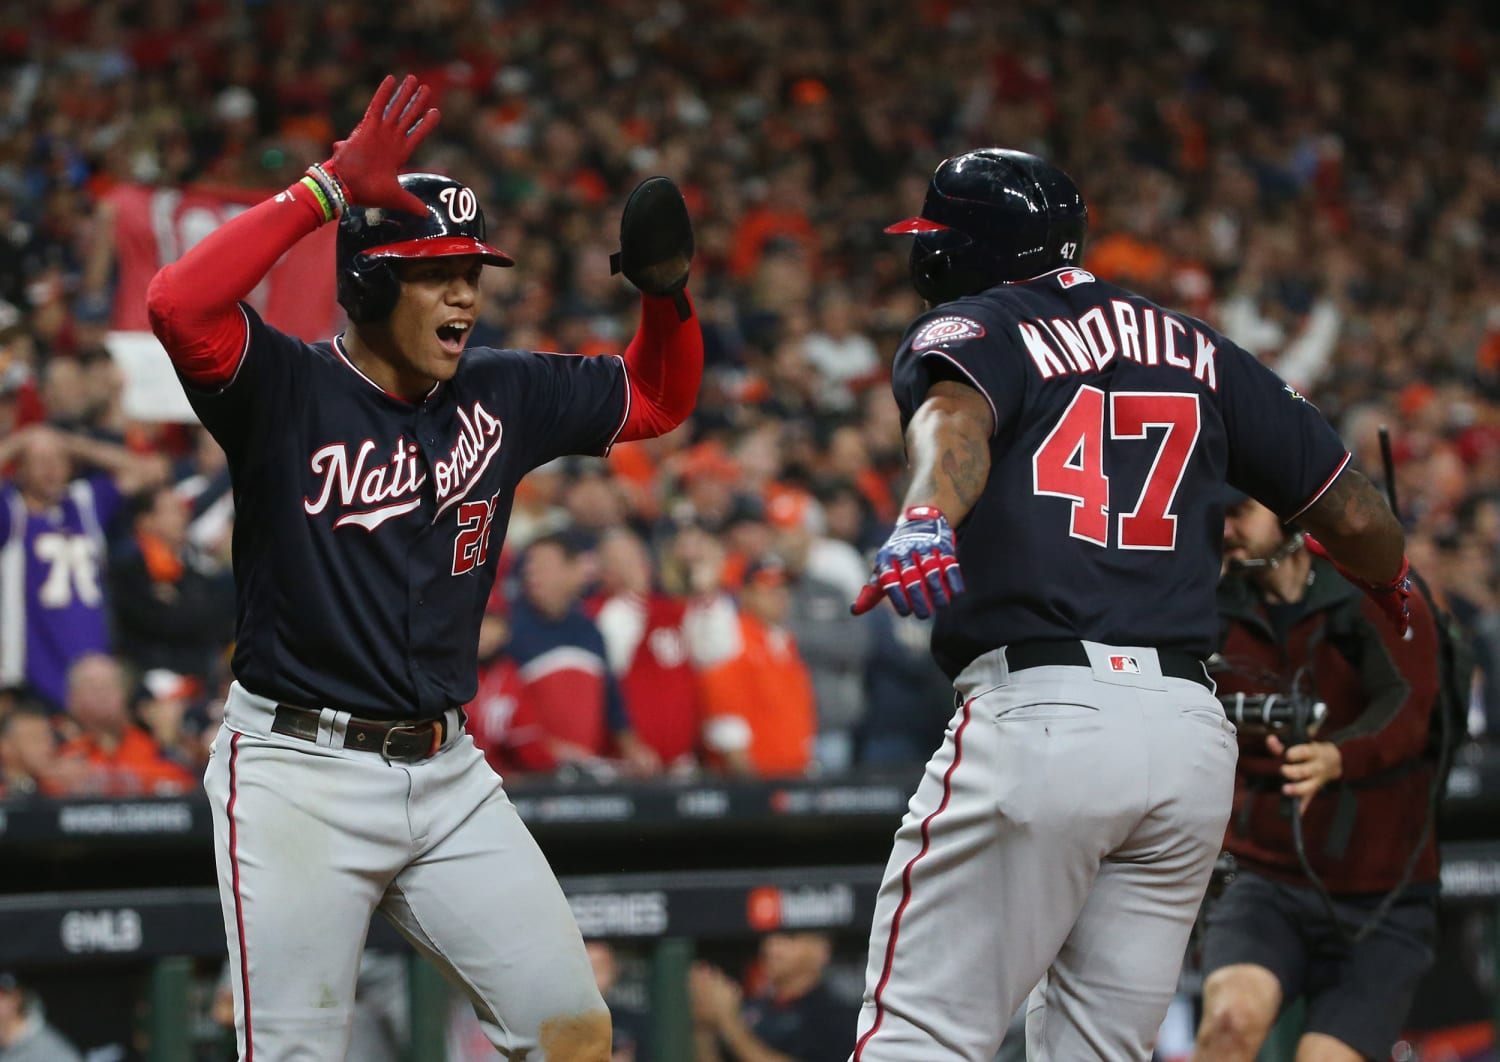 Nationals win World Series, beat Astros in Game 7 to cap off